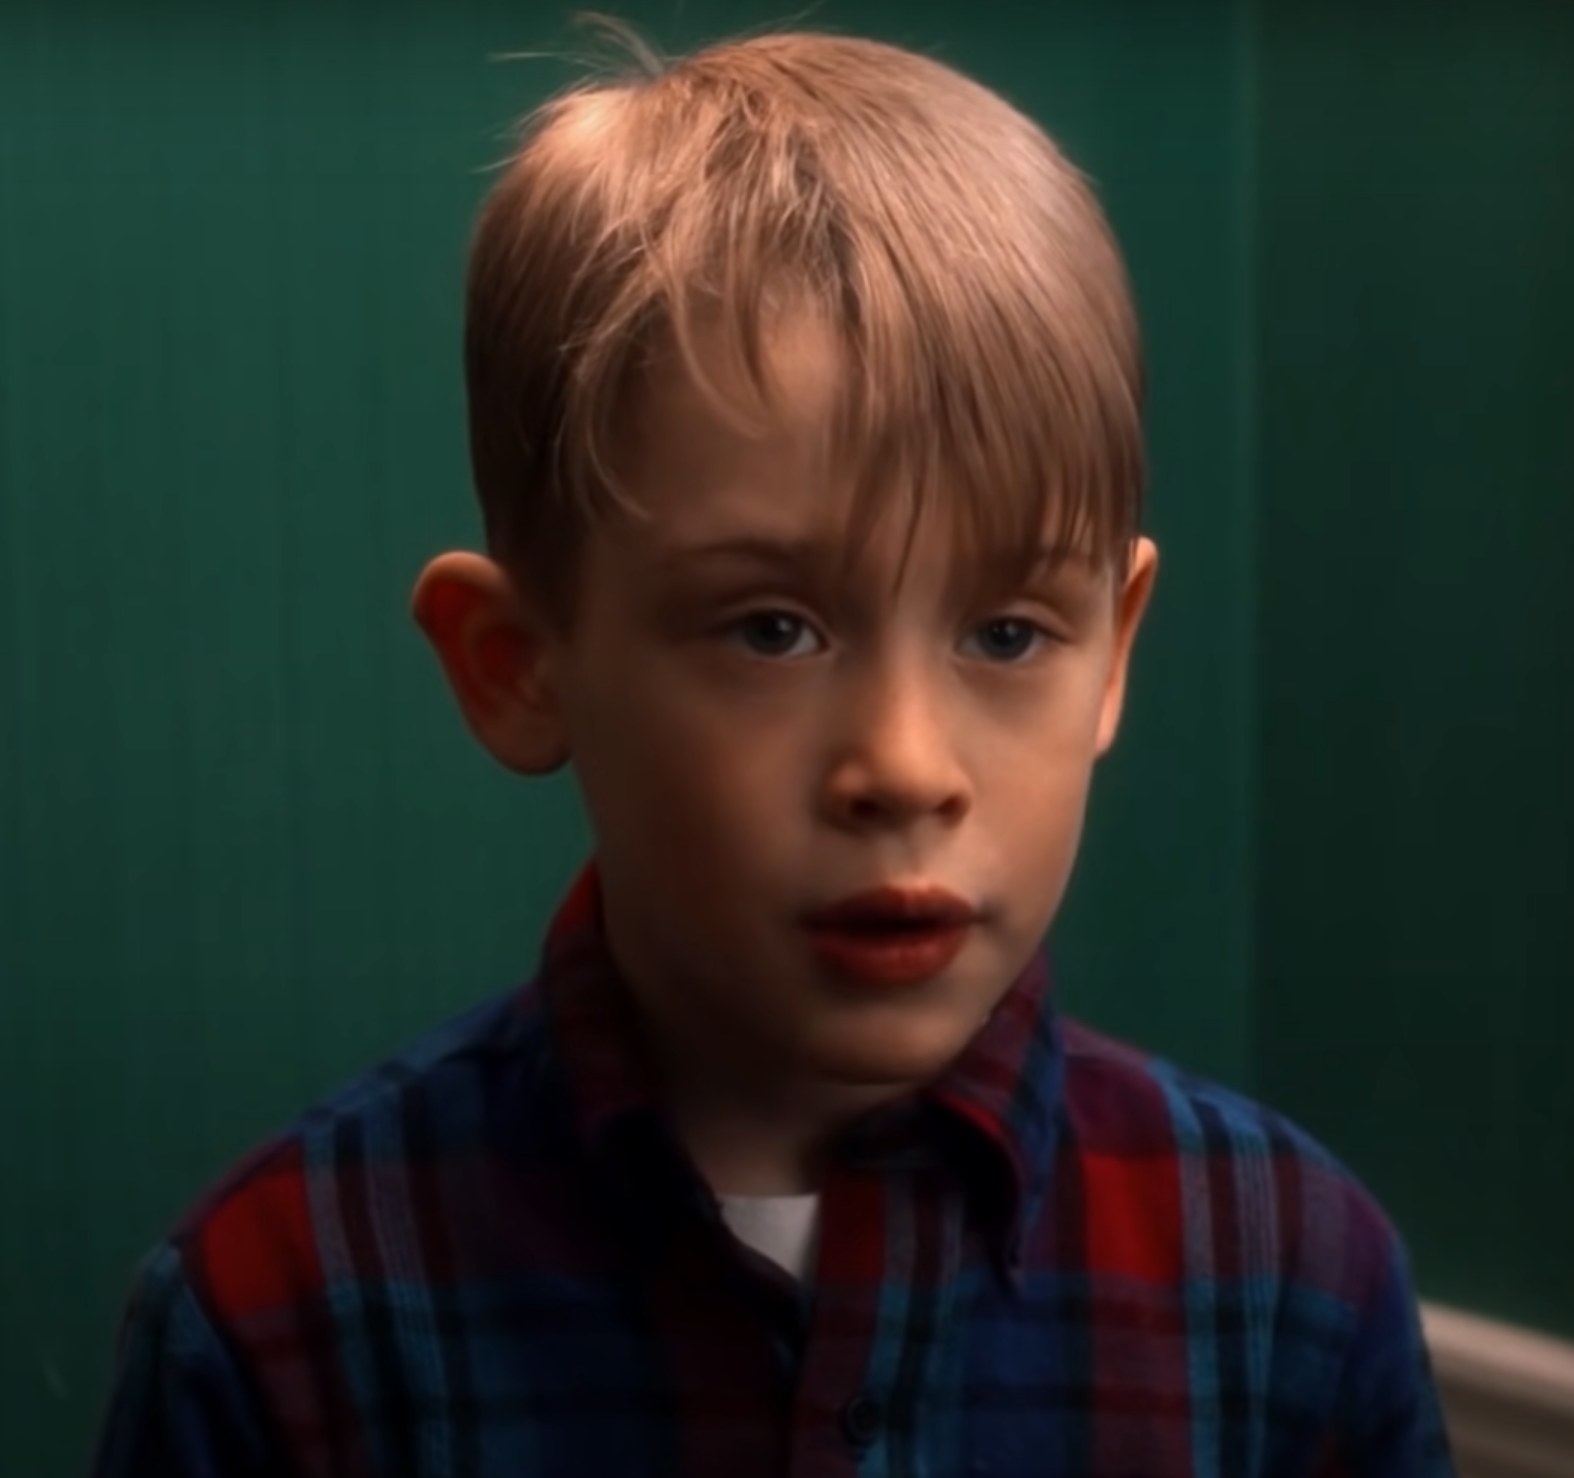 Macaulay Culkin as Kevin McCallister talks to his onscreen mom in &quot;Home Alone&quot;